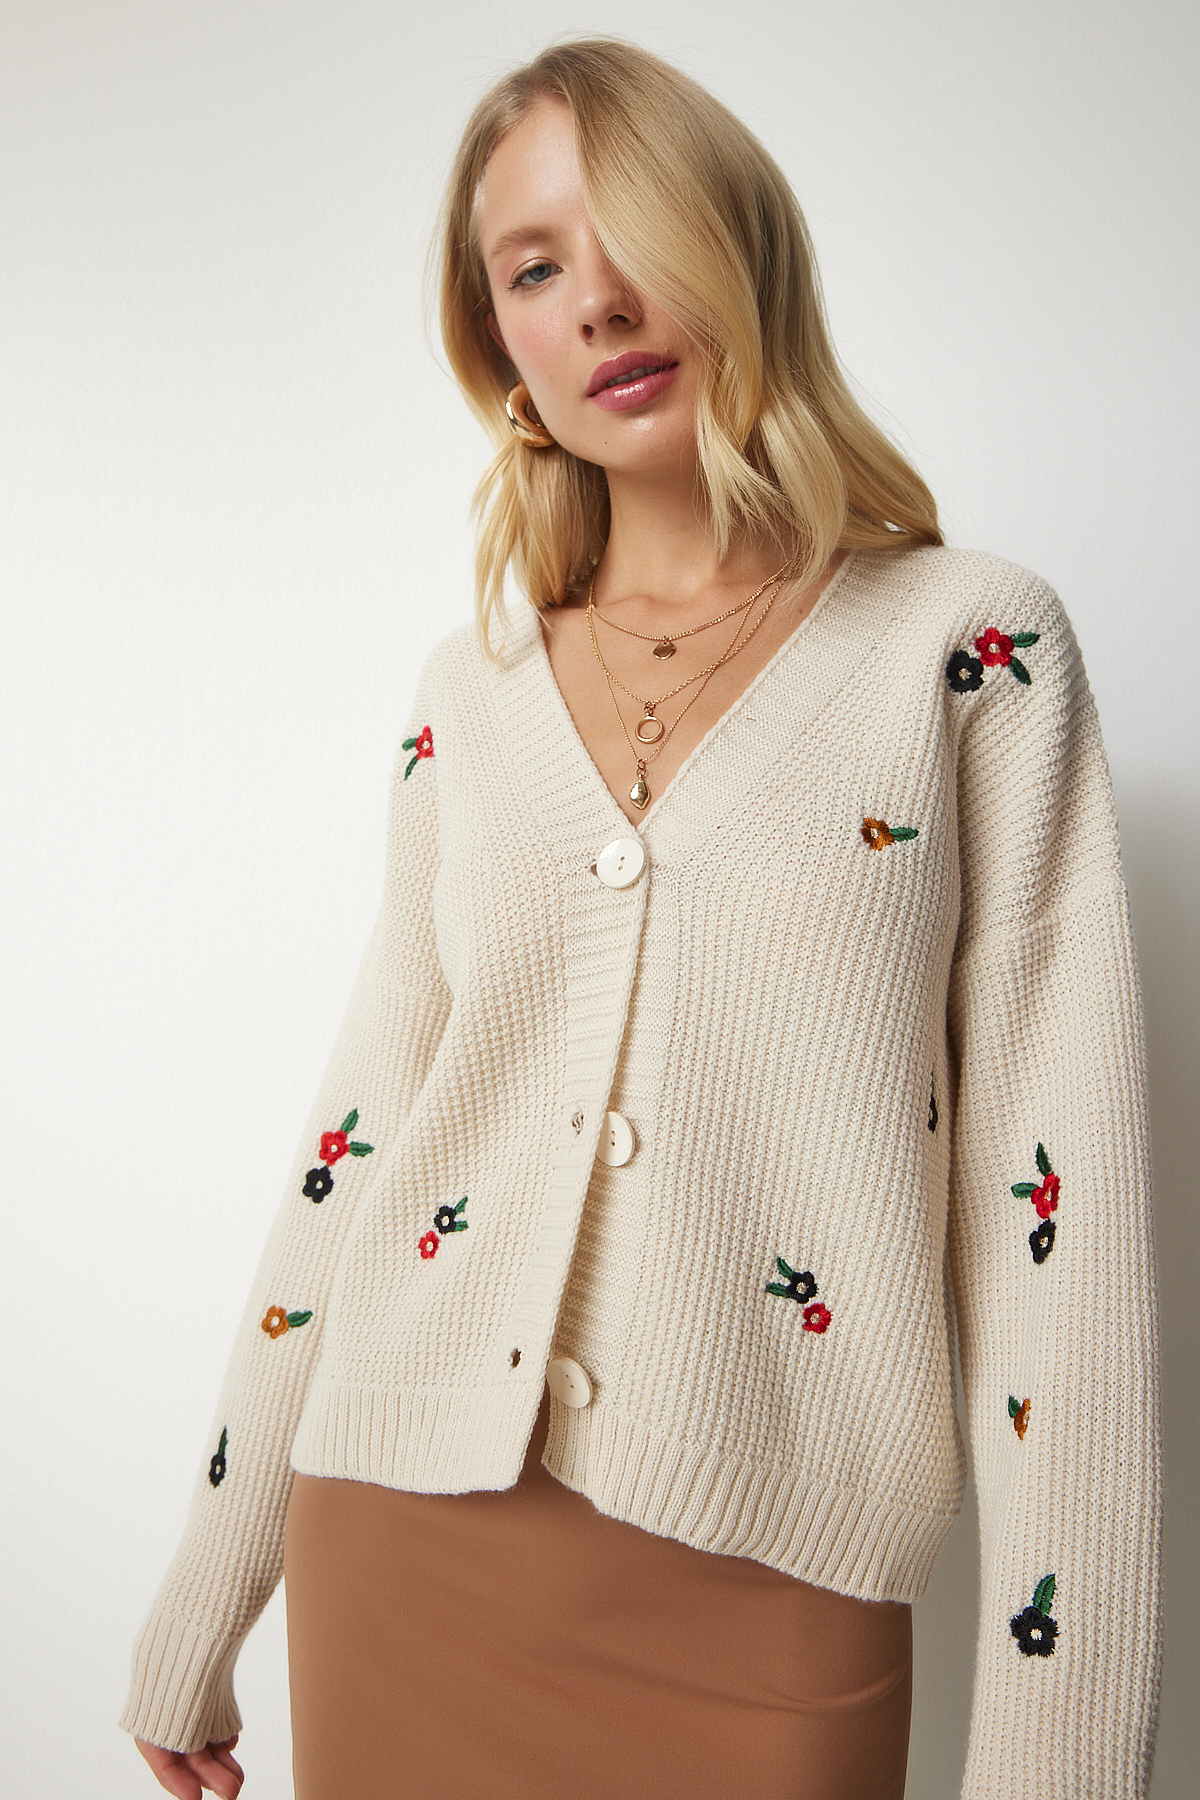 Levně Happiness İstanbul Women's Cream Floral Embroidery Buttons Knitwear Cardigan